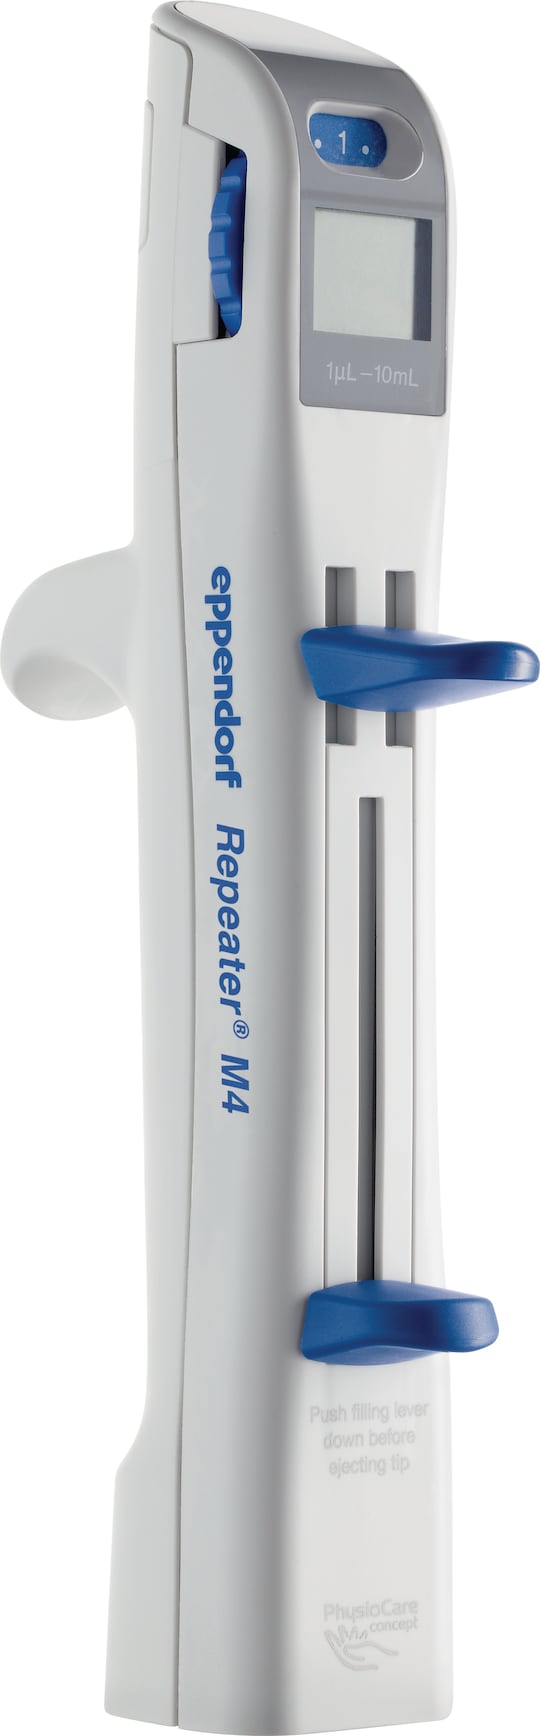 Side view of the Repeater® M4 multi-dispenser pipette from Eppendorf